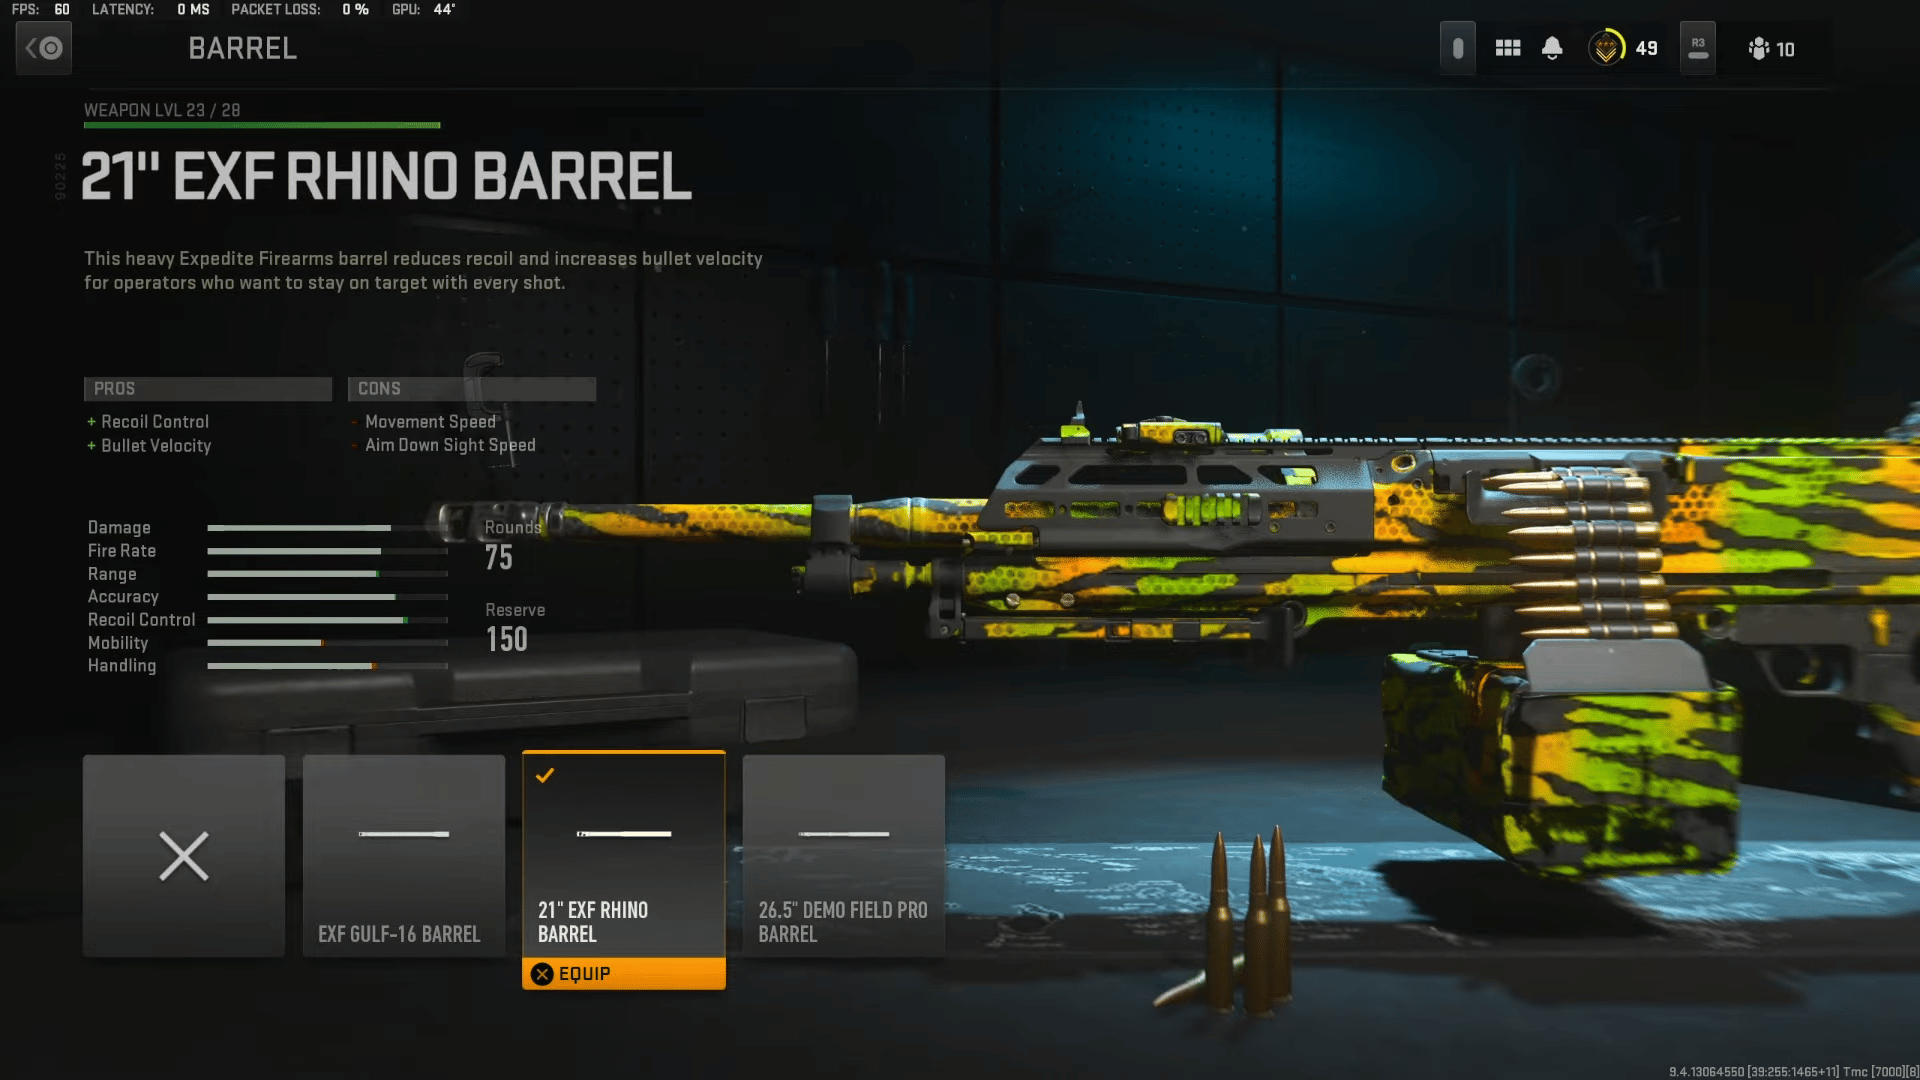 This barrel gives you more recoil control and velocity.